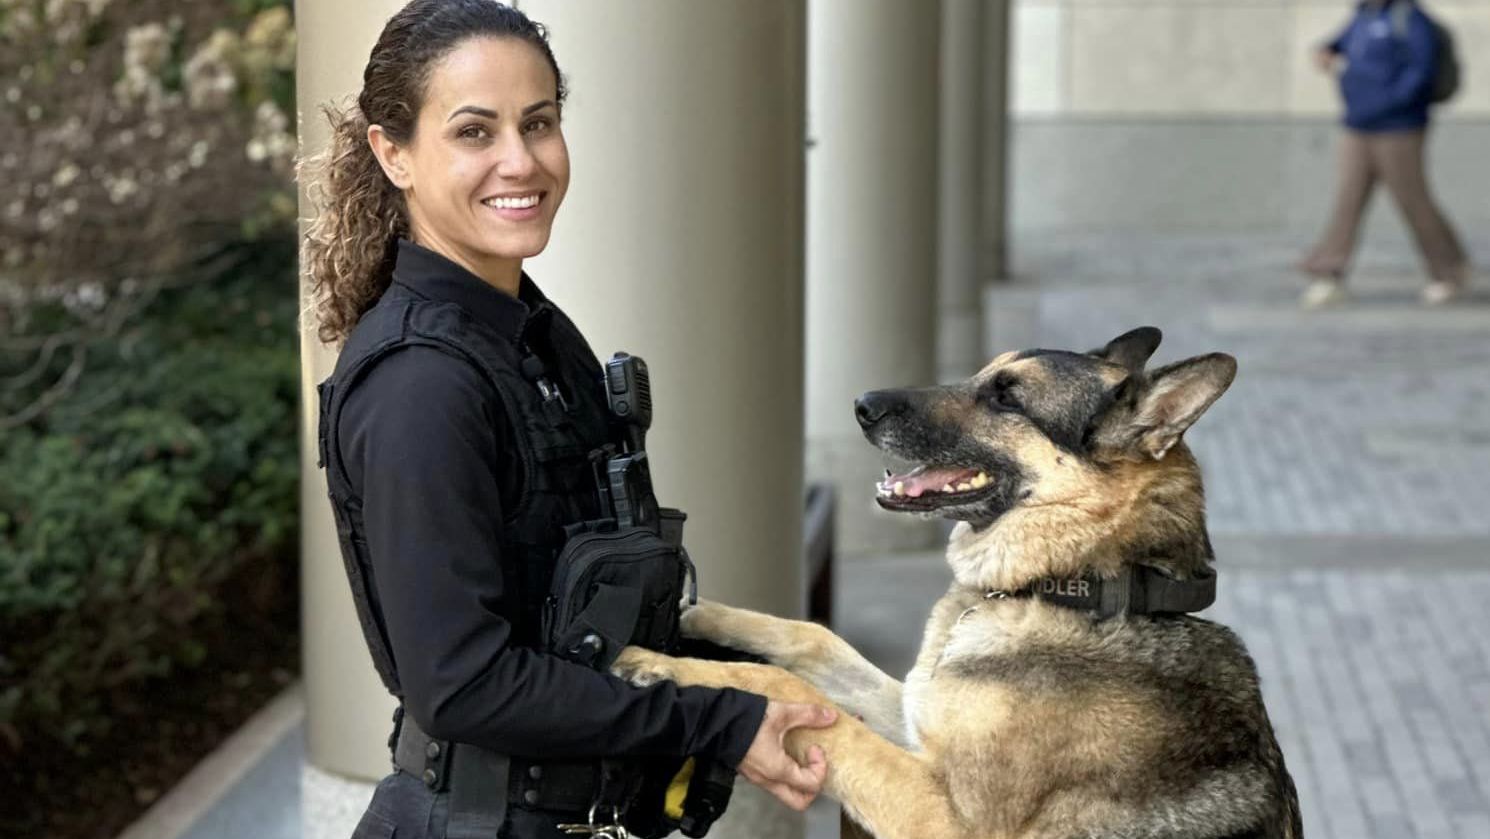 Temple Police Officer Natalie Sherman patrols Main Campus with K9 Officer Chandler.